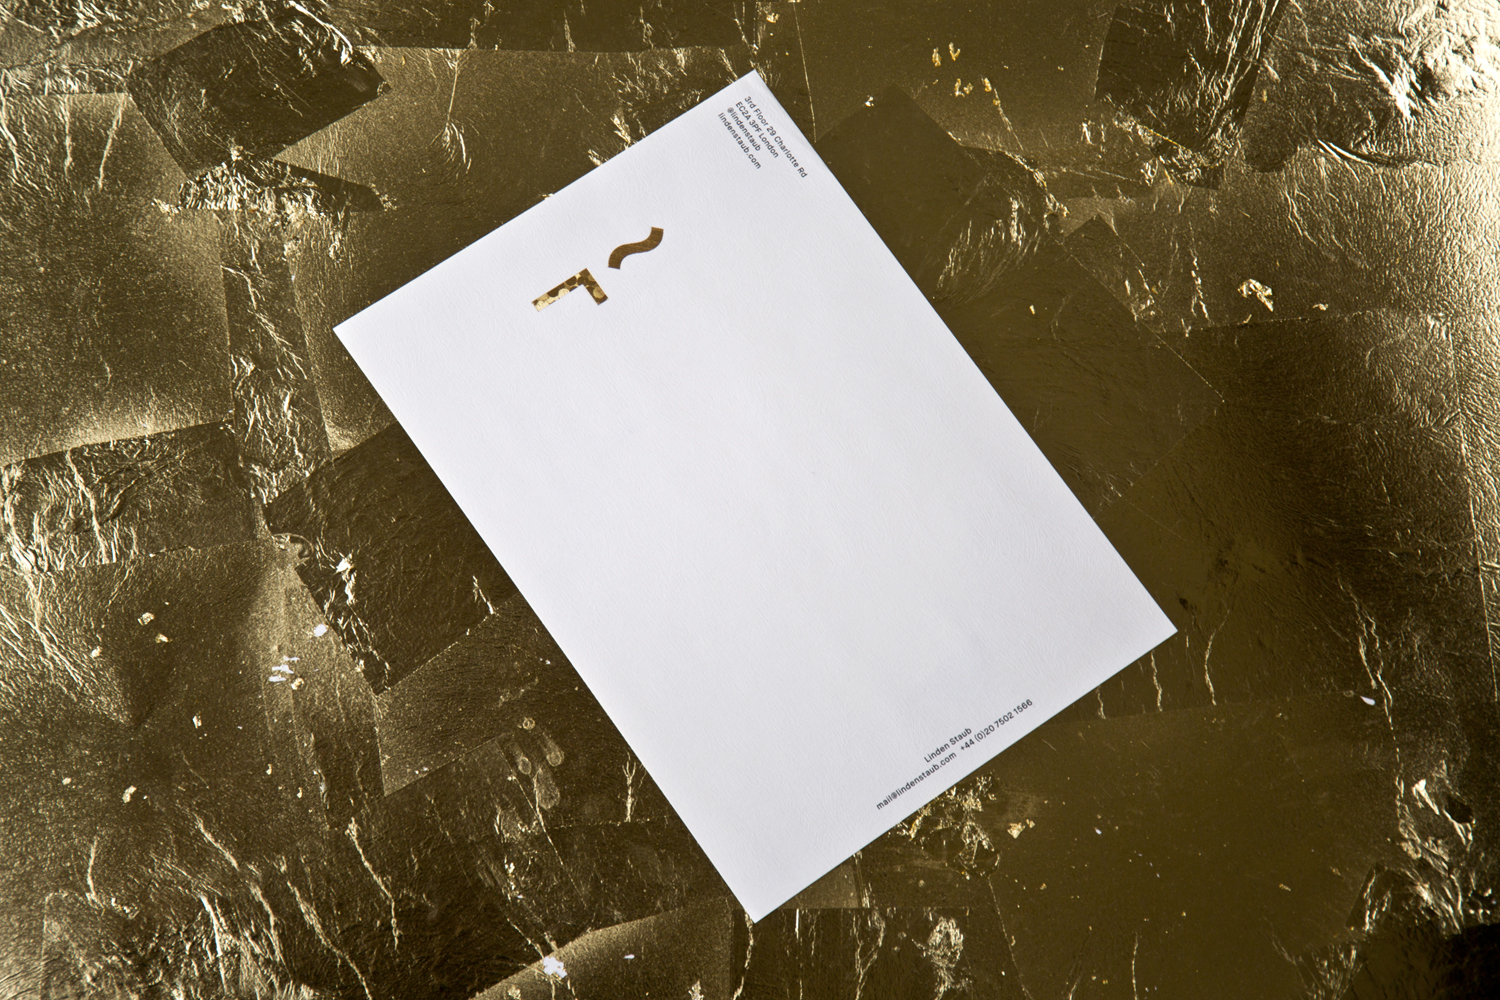 Logo and gold foiled envelope and headed paper for UK model agency Linden Staub by London-based graphic design studio Bibliothèque.